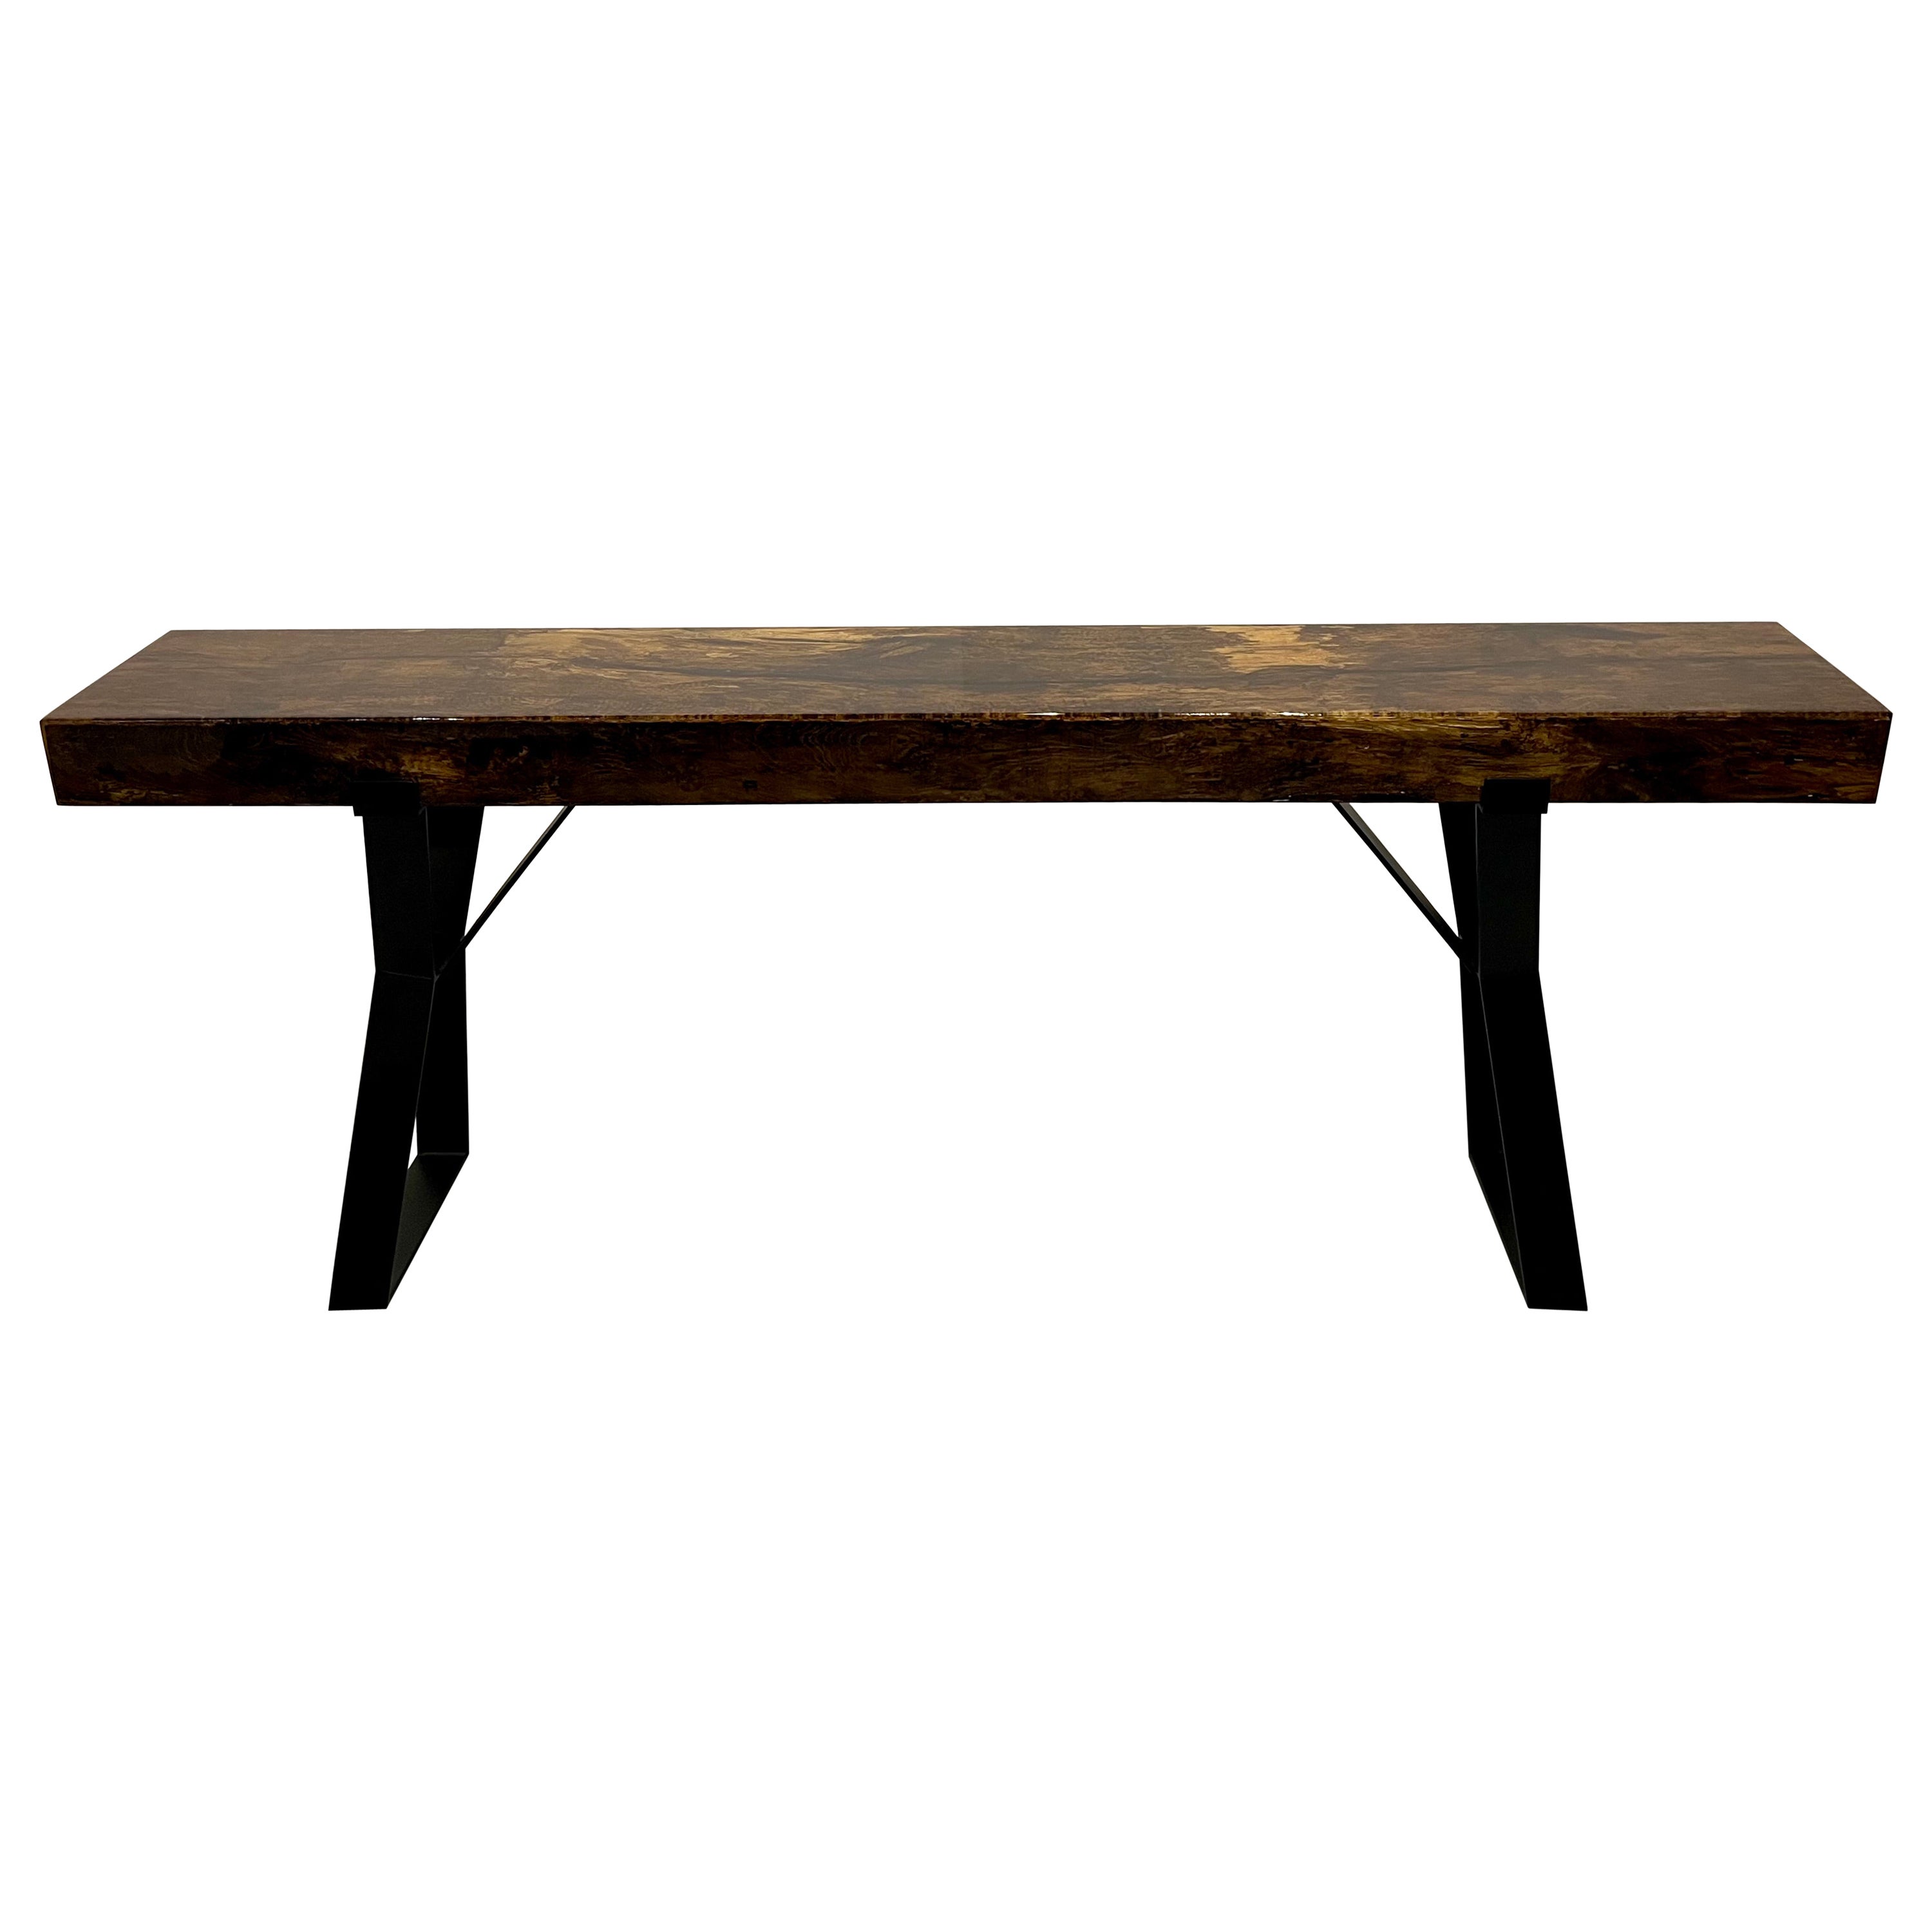 Bar Table Made of Oak Wooden Beam, Cast in Epoxy, on a Steel Frame For Sale